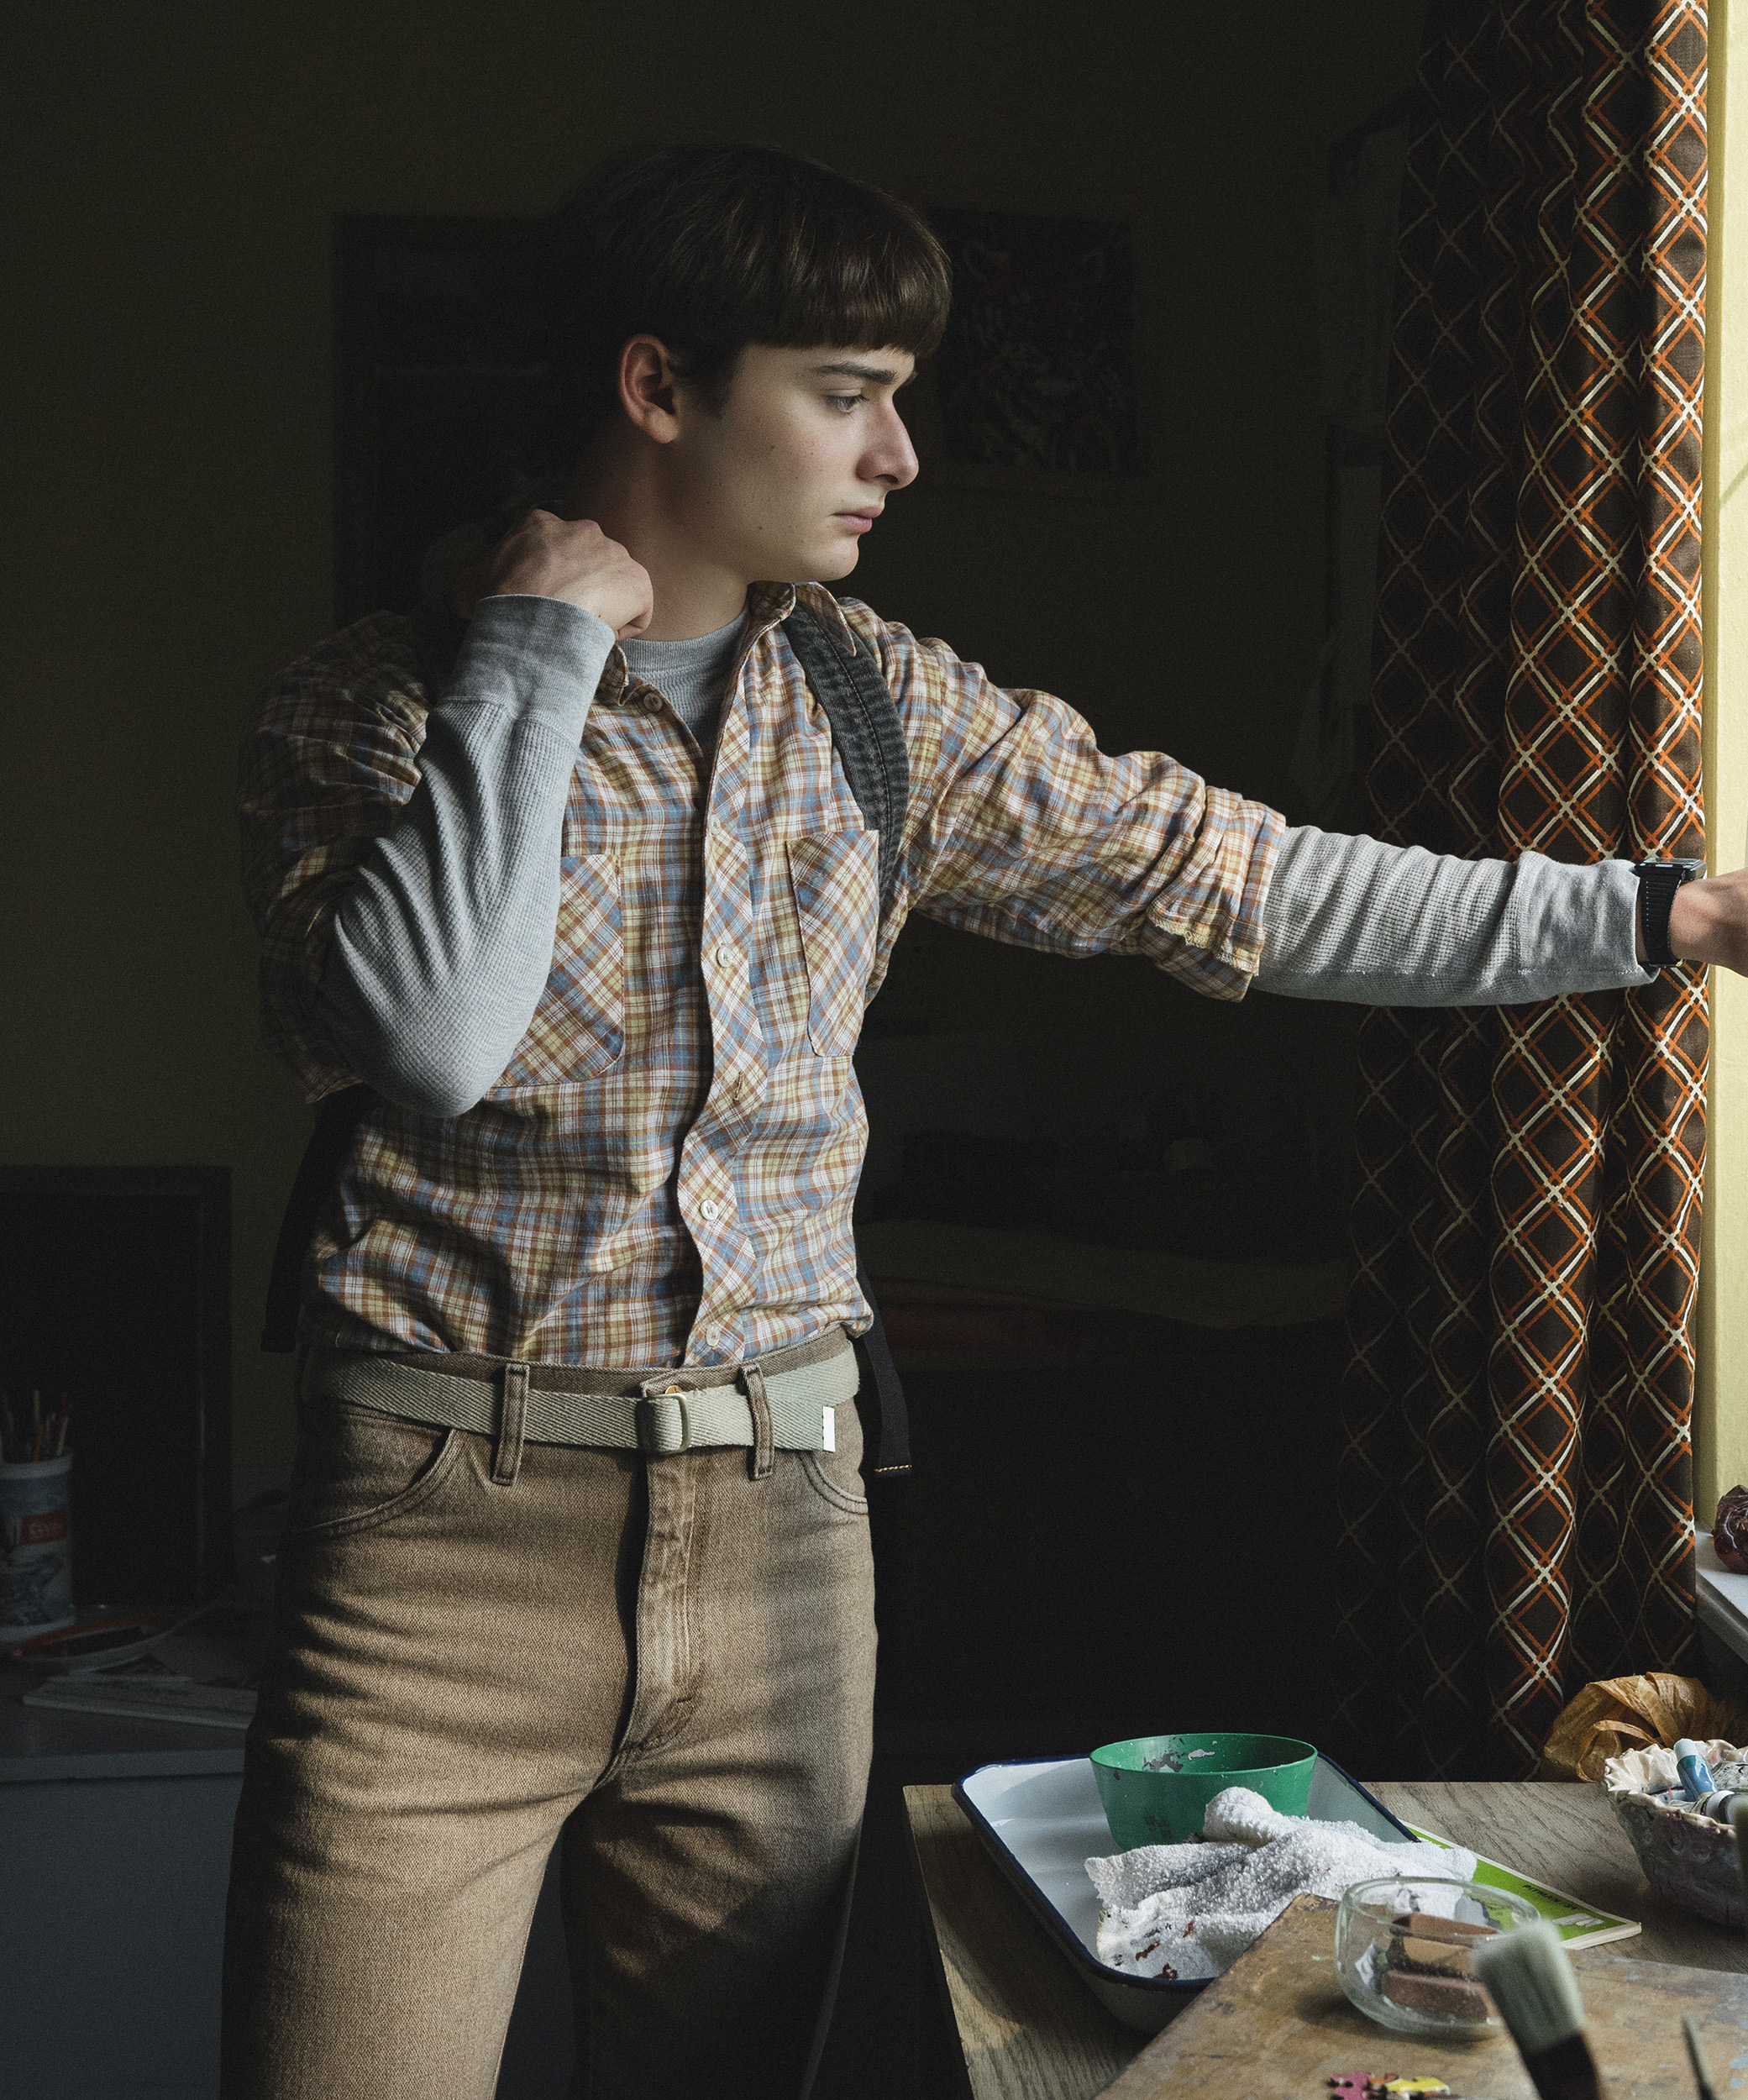 Stranger Things' star on Will's sexuality: 'It's up to the audience's interpretation'